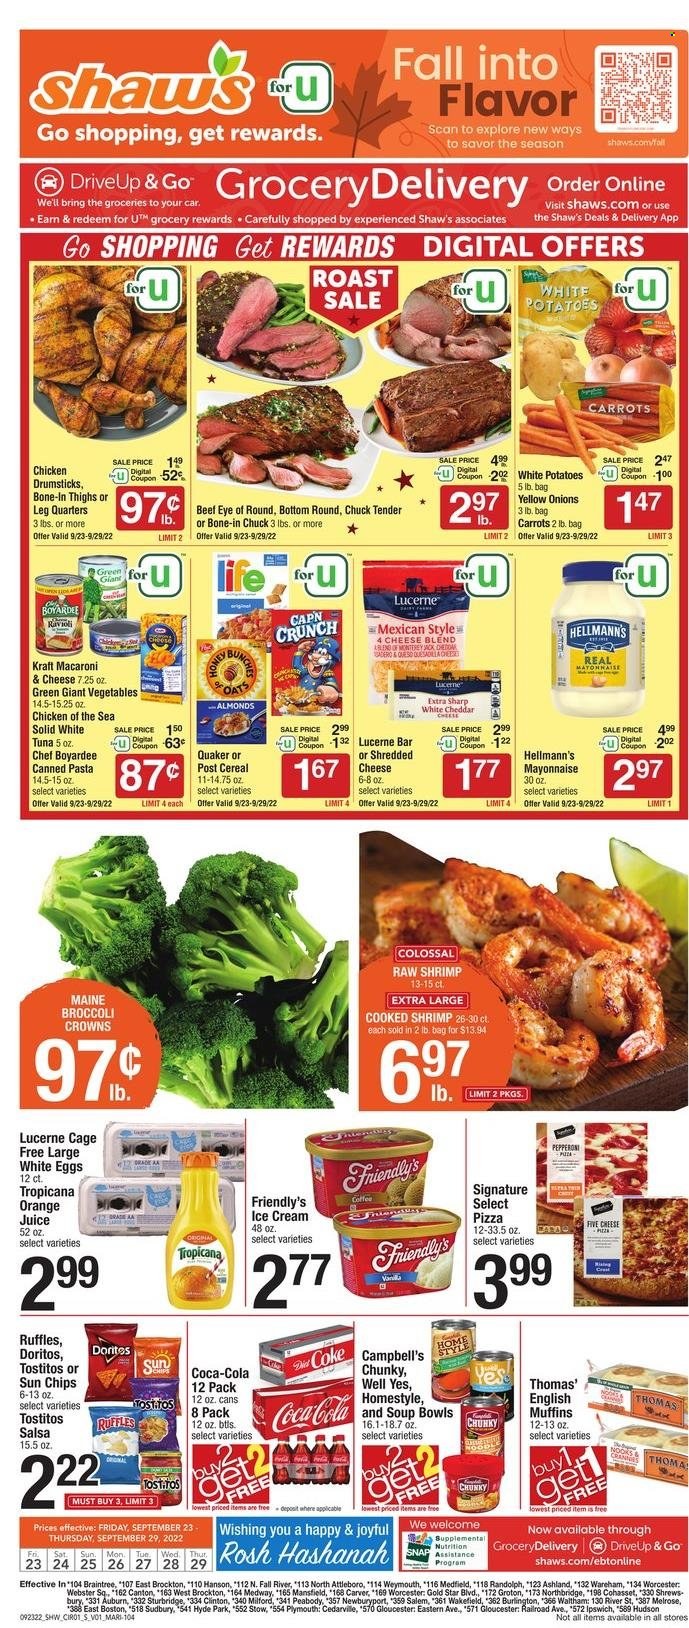 thumbnail - Shaw’s Flyer - 09/23/2022 - 09/29/2022 - Sales products - english muffins, broccoli, carrots, onion, tuna, shrimps, Campbell's, macaroni & cheese, pizza, soup, pasta, Quaker, Kraft®, ready meal, Monterey Jack cheese, shredded cheese, eggs, cage free eggs, large eggs, mayonnaise, Hellmann’s, Friendly's Ice Cream, Doritos, chips, Ruffles, Tostitos, canned tuna, canned vegetables, Chicken of the Sea, Chef Boyardee, canned fish, cereals, salsa, almonds, Coca-Cola, orange juice, juice, soft drink, Coke, carbonated soft drink, chicken drumsticks, beef meat, eye of round, chuck tender. Page 1.